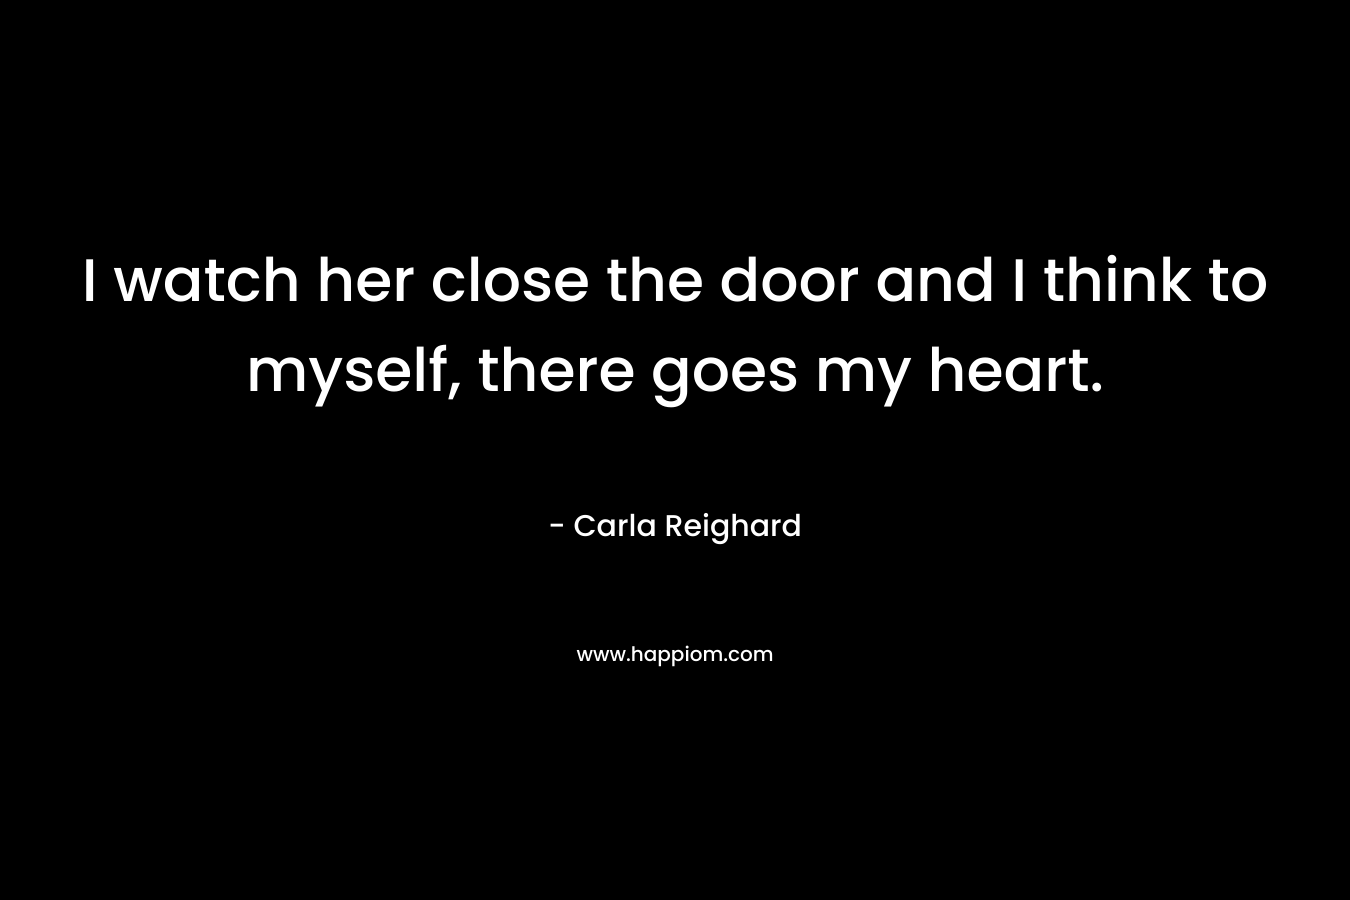 I watch her close the door and I think to myself, there goes my heart. – Carla Reighard